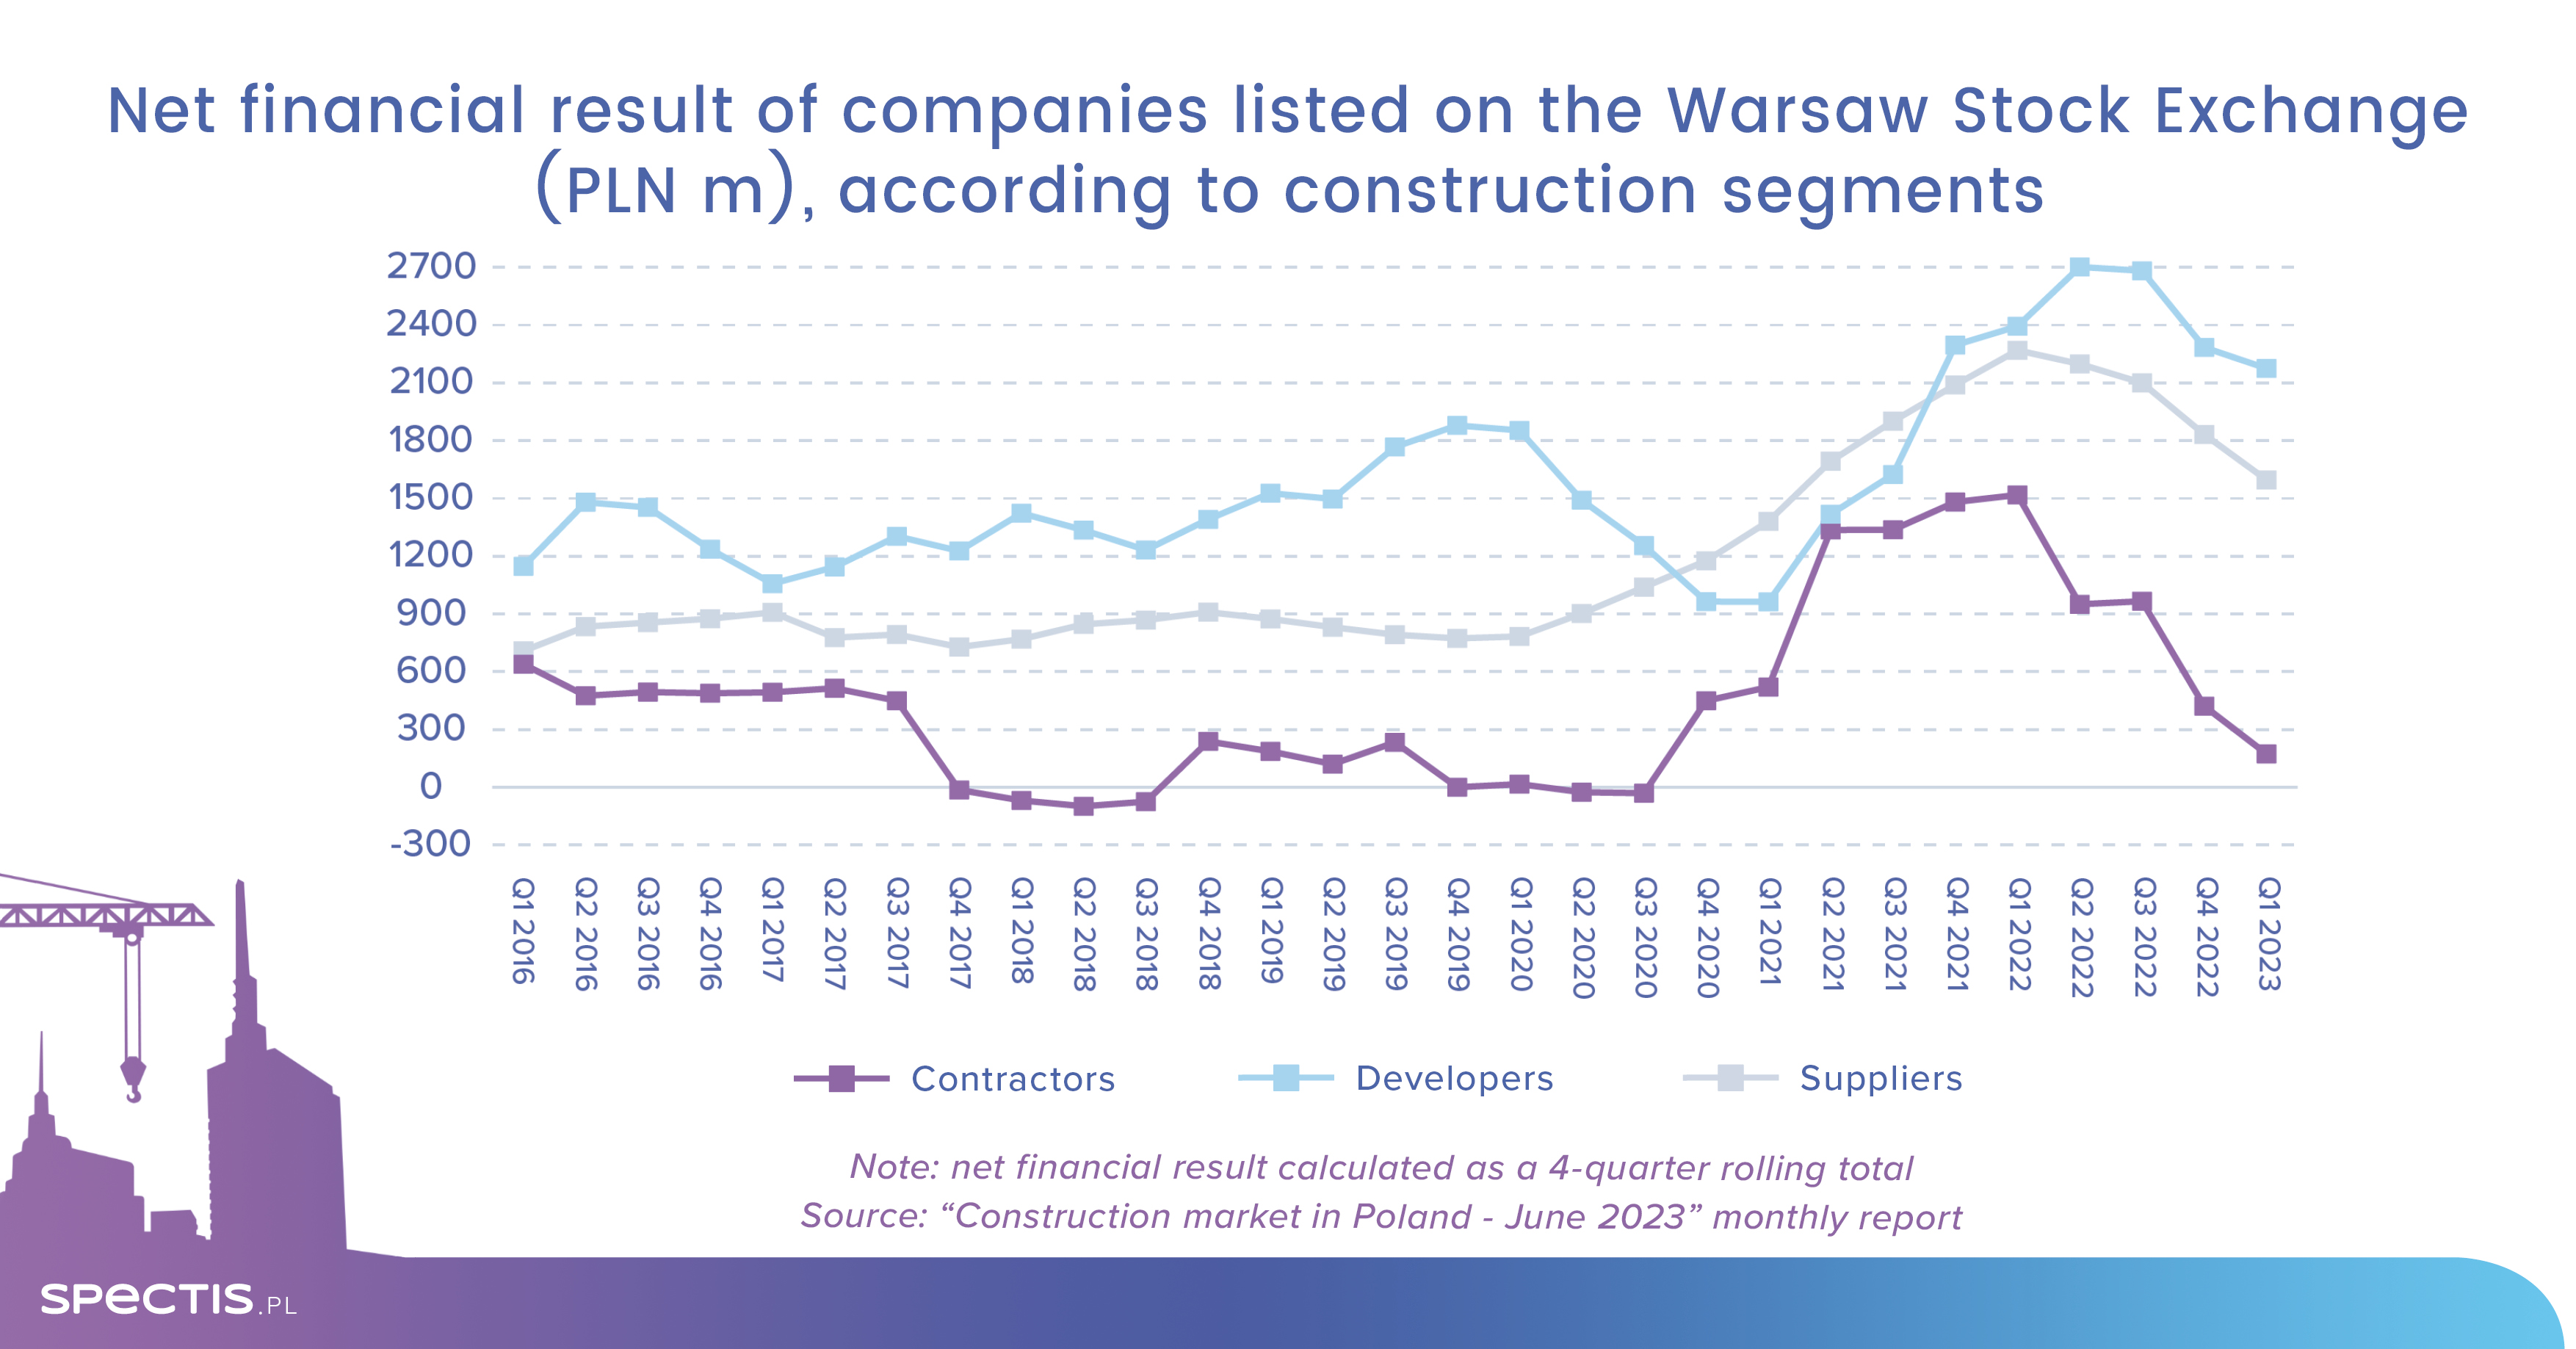 WSE-listed construction companies report lower profits as of Q1 2023